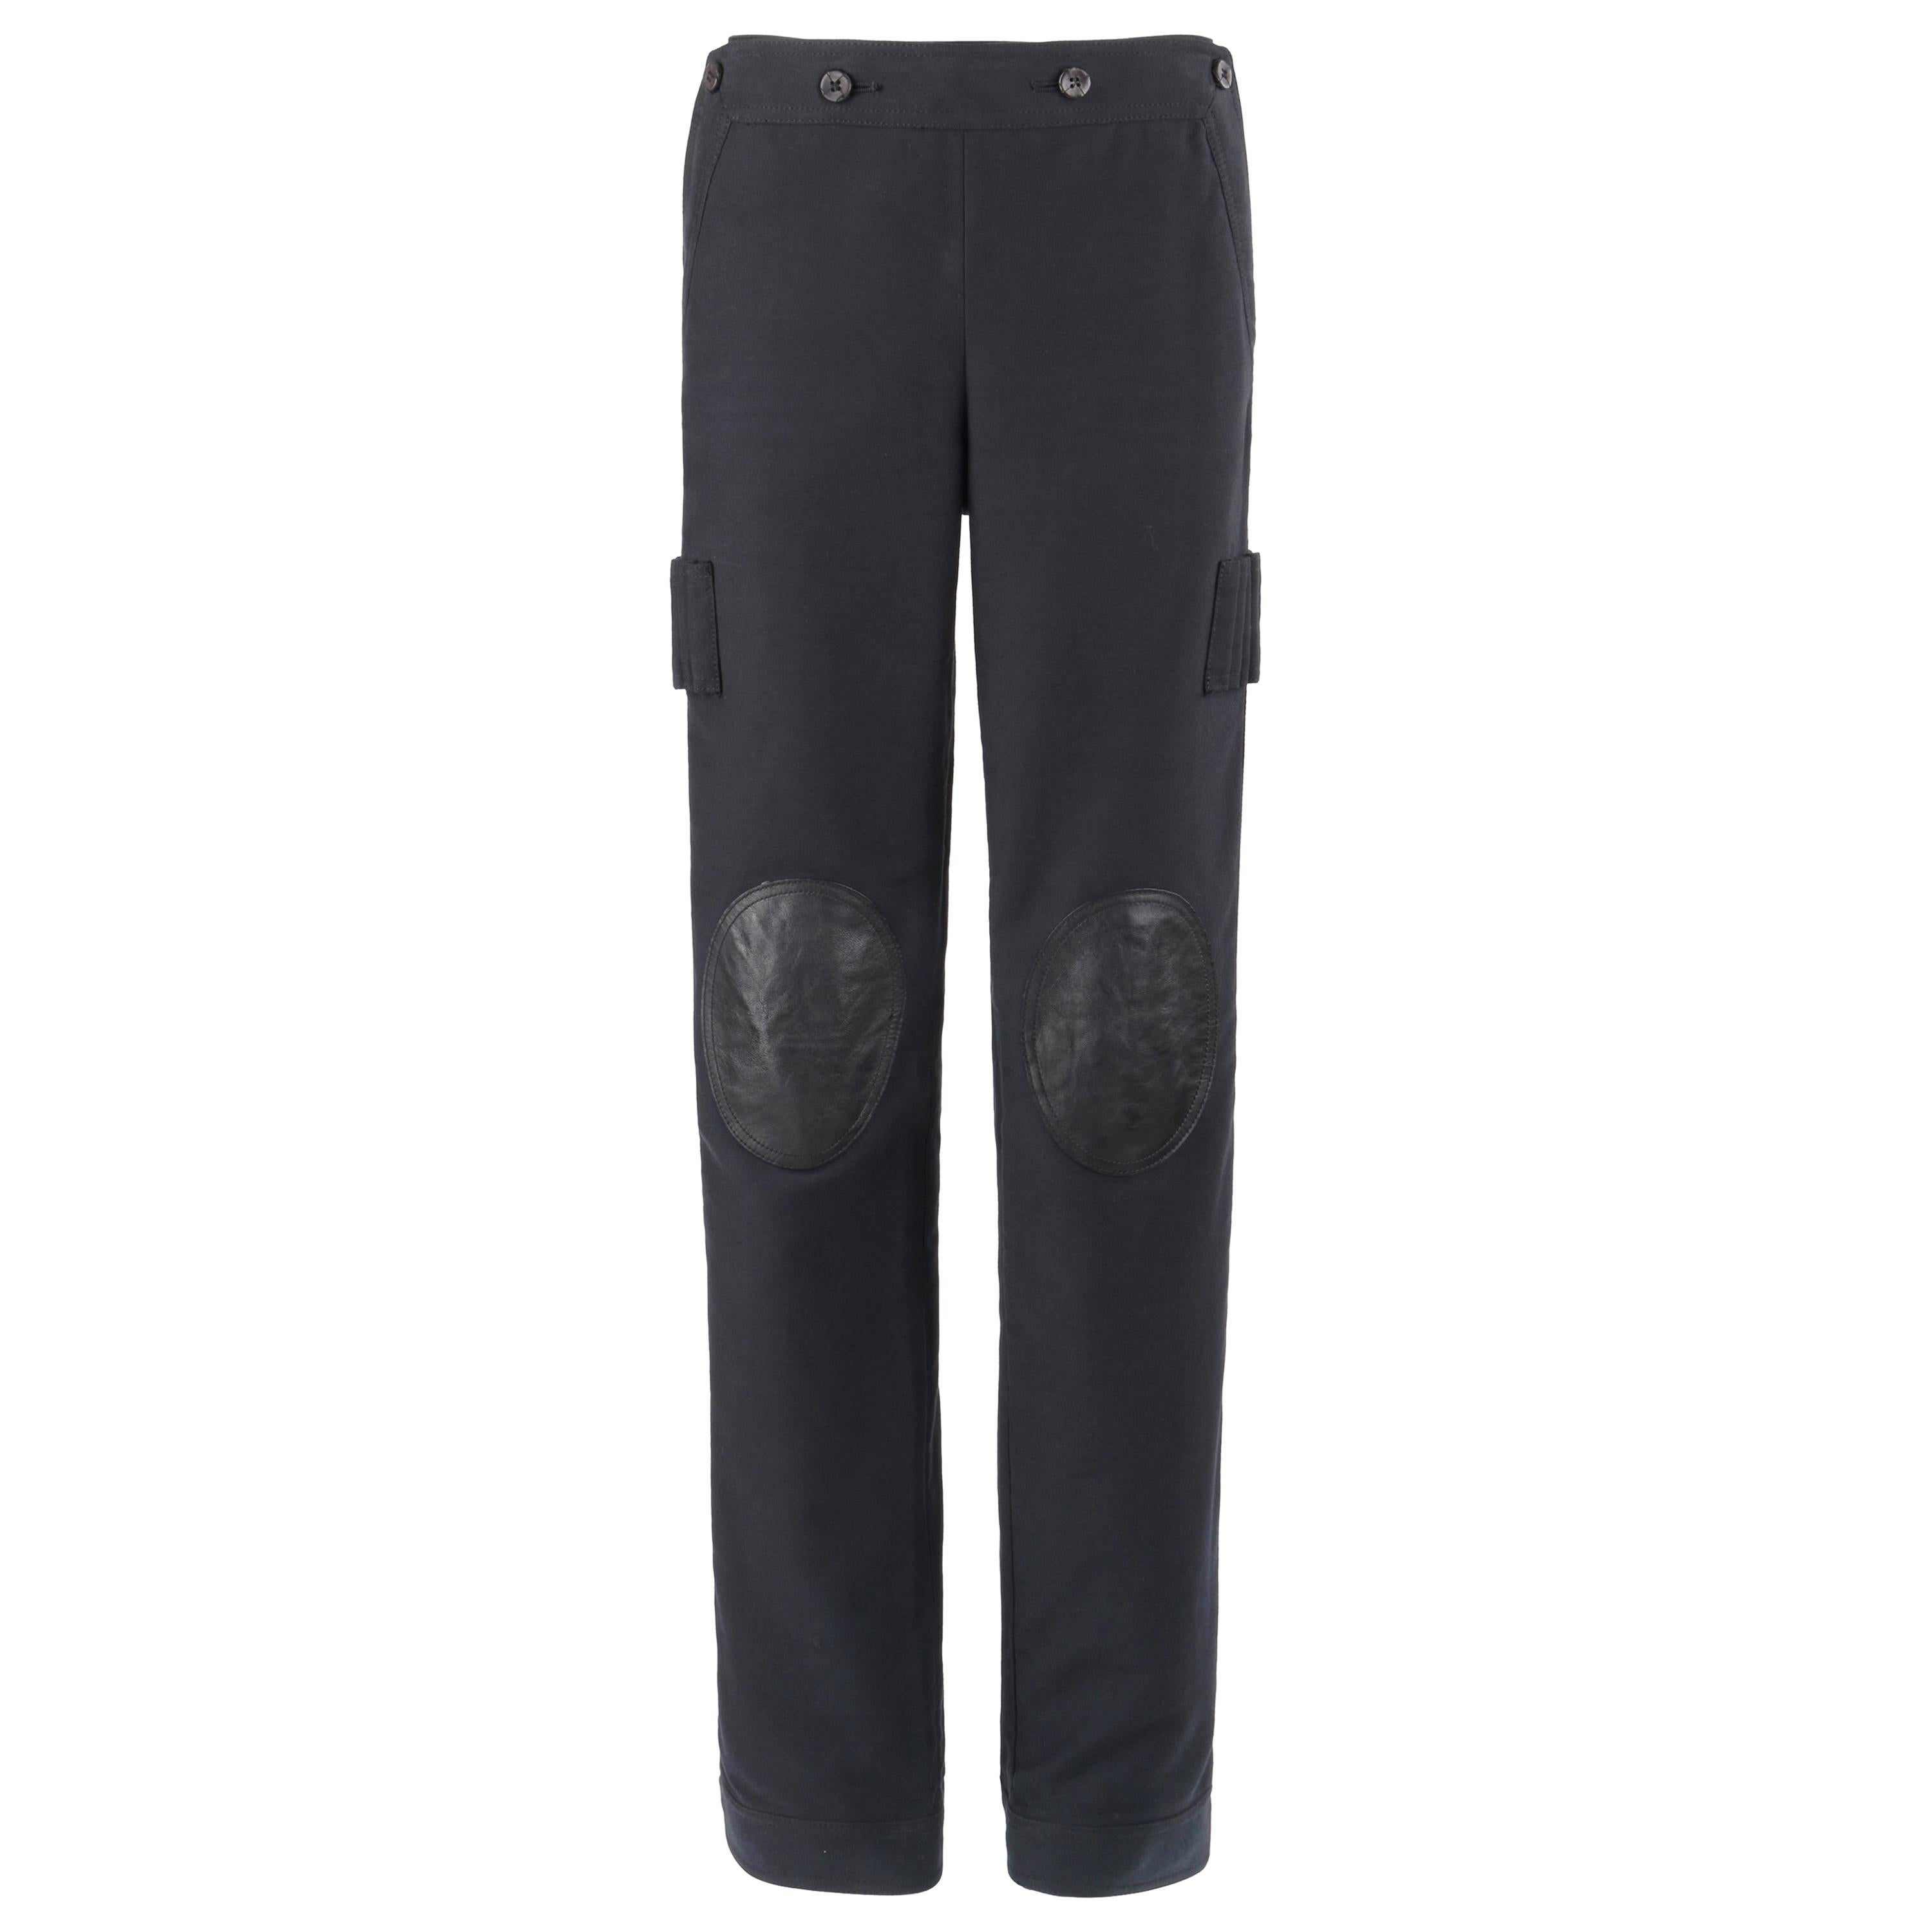 ALEXANDER McQUEEN A/W 2003 "Scanners" High Waisted Leather Knee Pad Cargo Pants For Sale